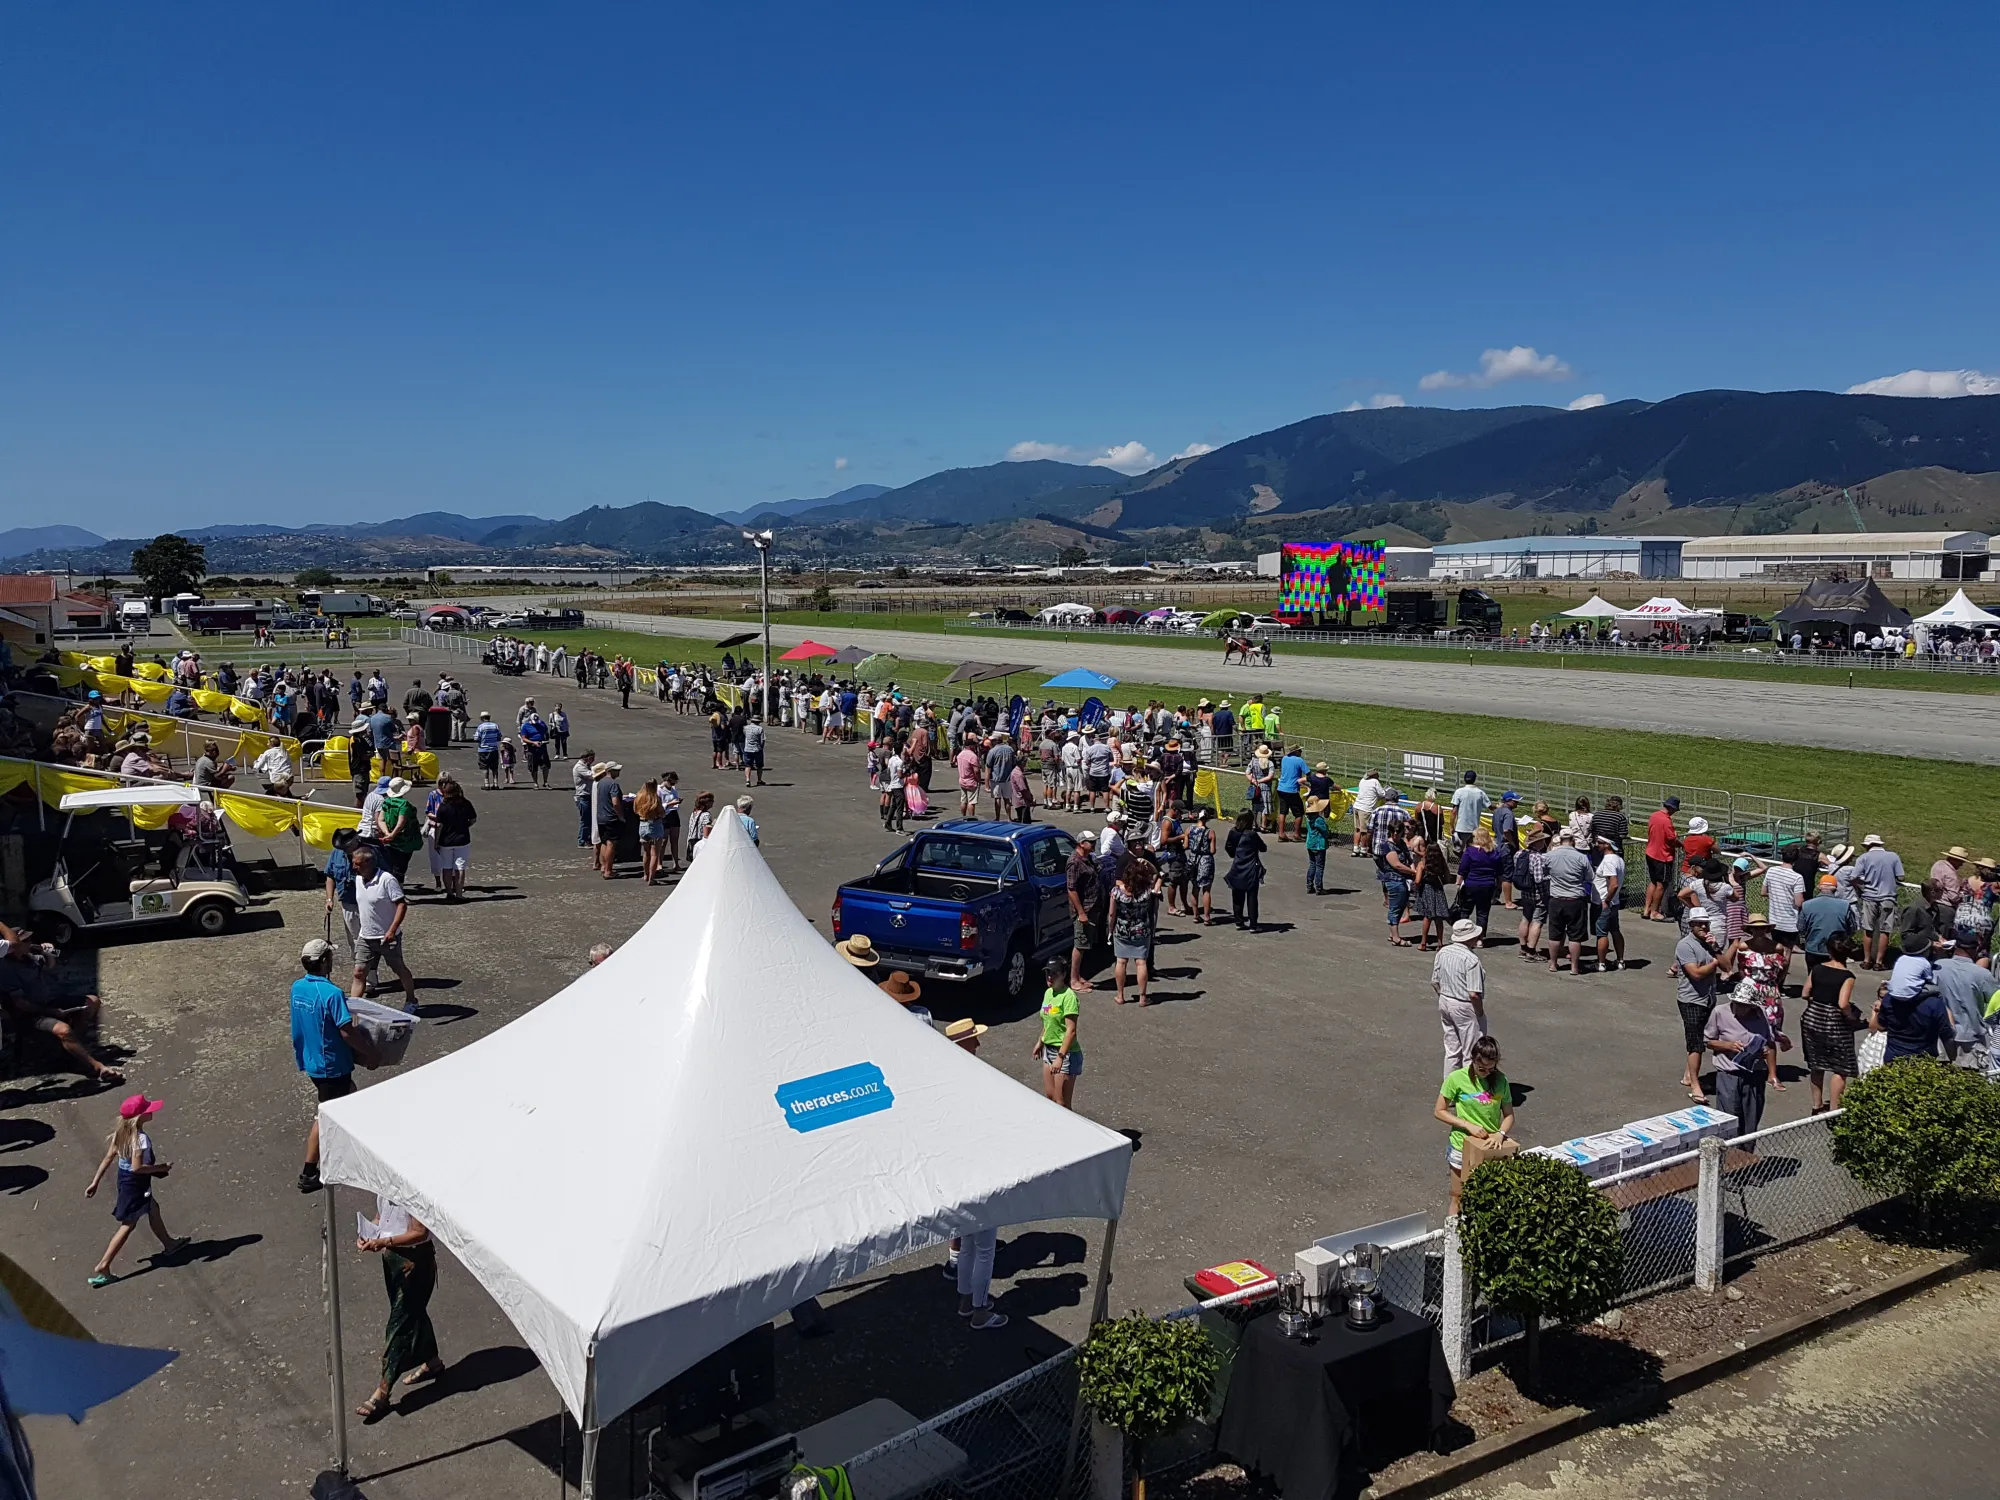 Competitions at Nelson Harness Races Summer race meet